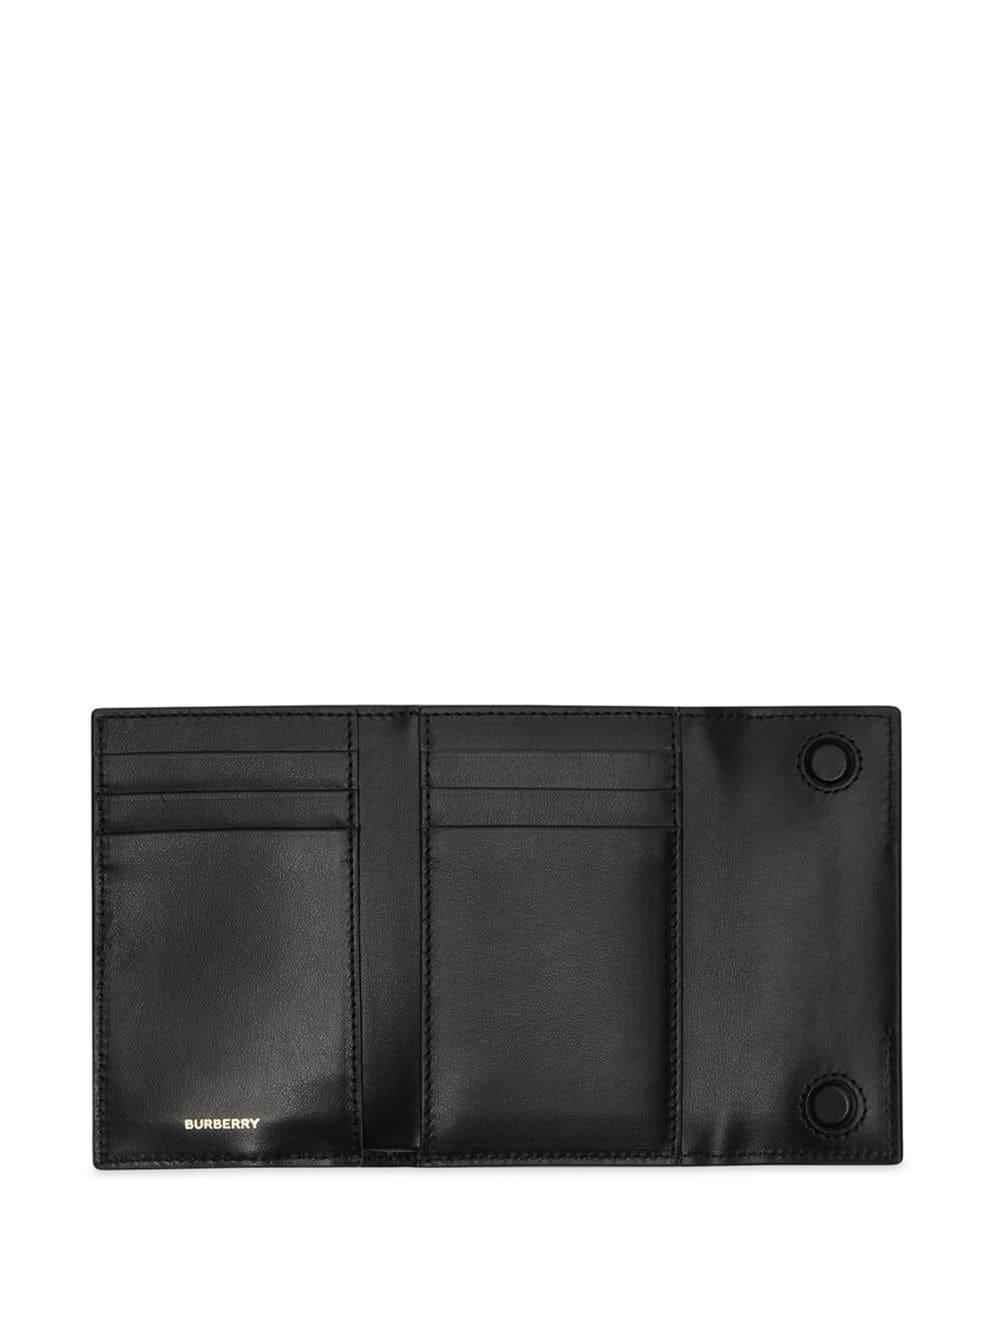 Burberry Horseferry Print Leather Folding Wallet in Black - Lyst